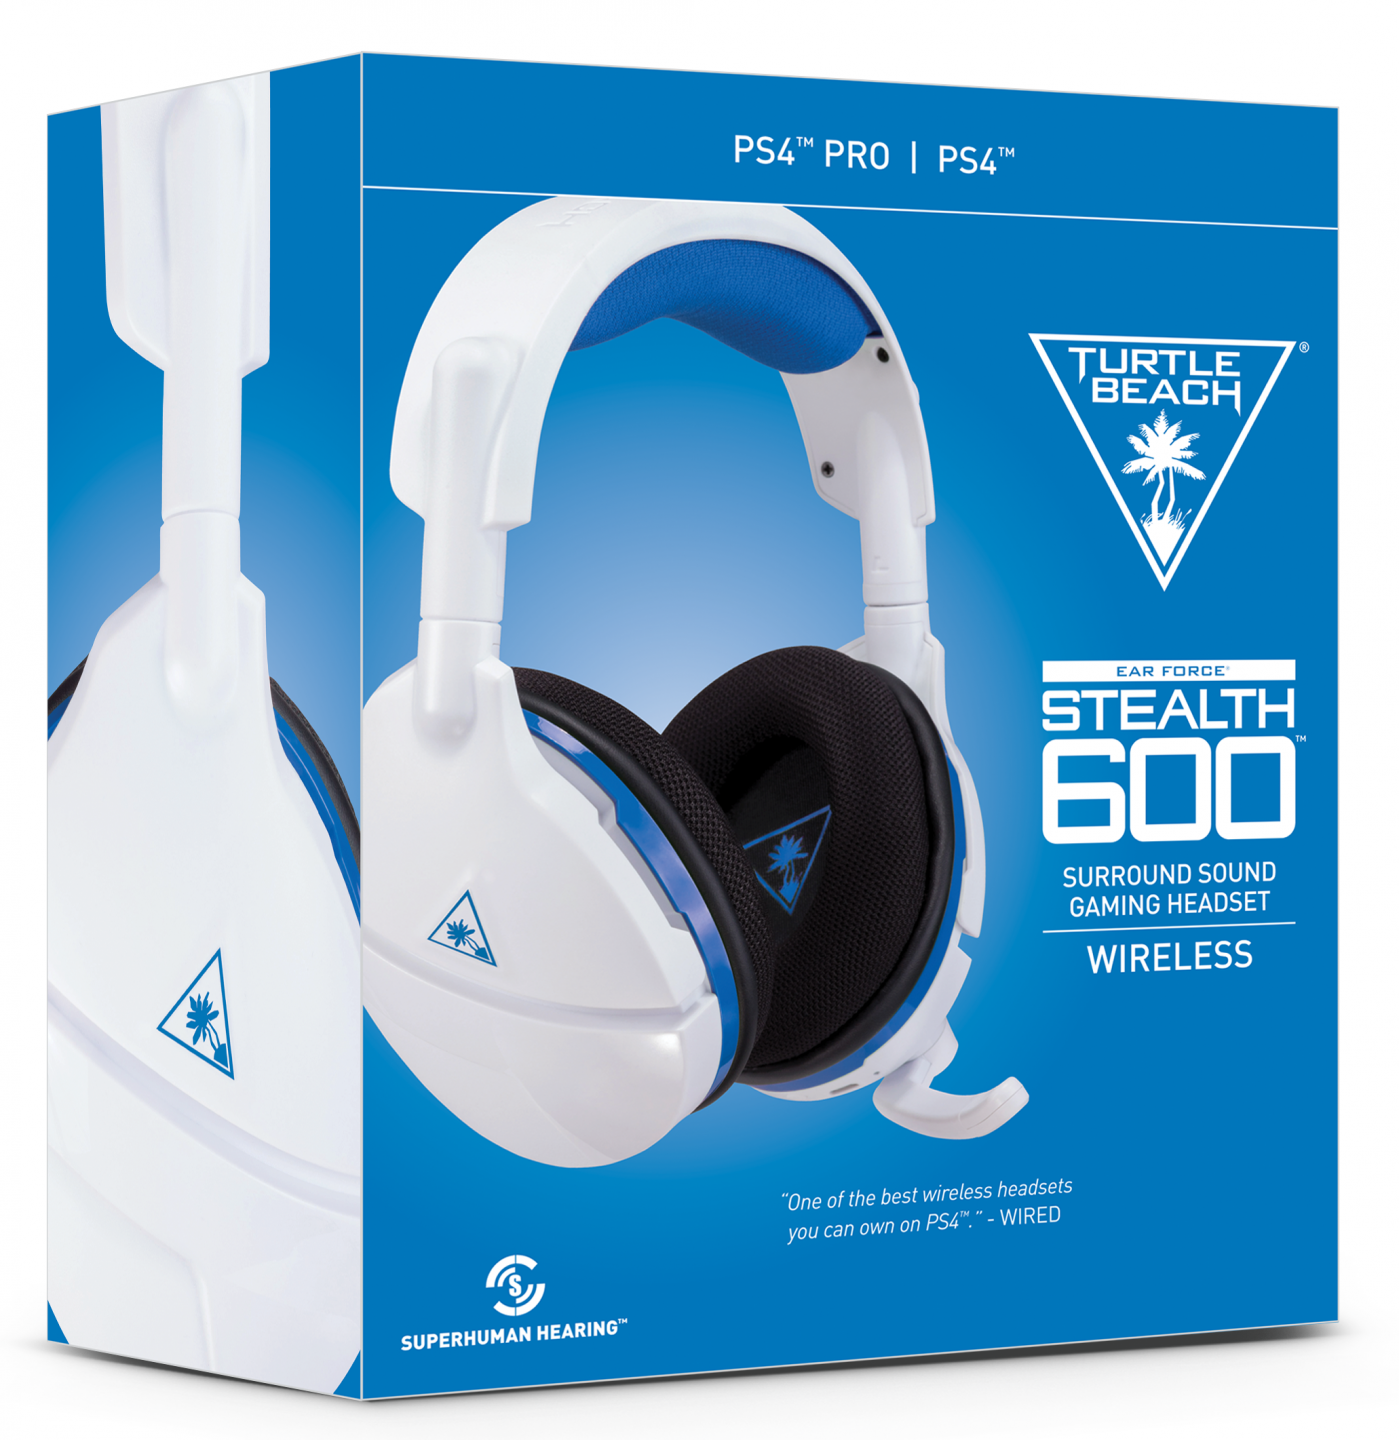 Stealth 600 PlayStation White (Turtle Beach)